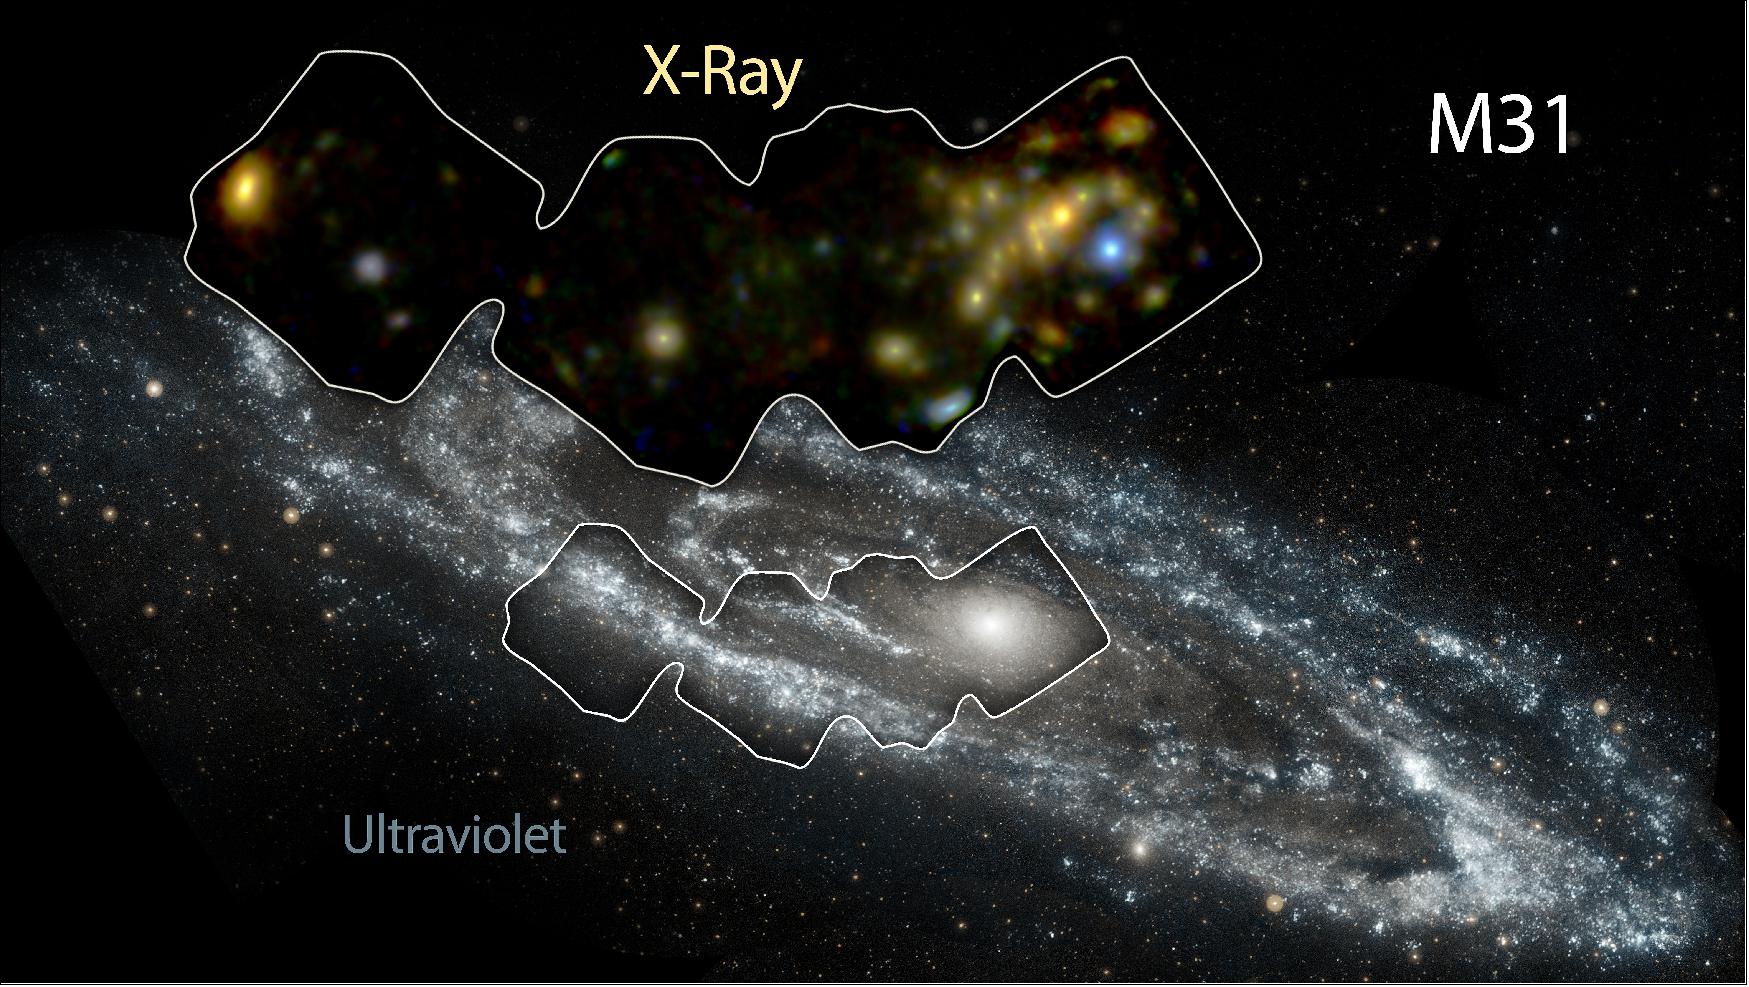 Figure 33: NuSTAR has imaged a swath of the Andromeda galaxy — the nearest large galaxy to our own Milky Way galaxy (image credit: NASA/JPL, Caltech, GSFC)